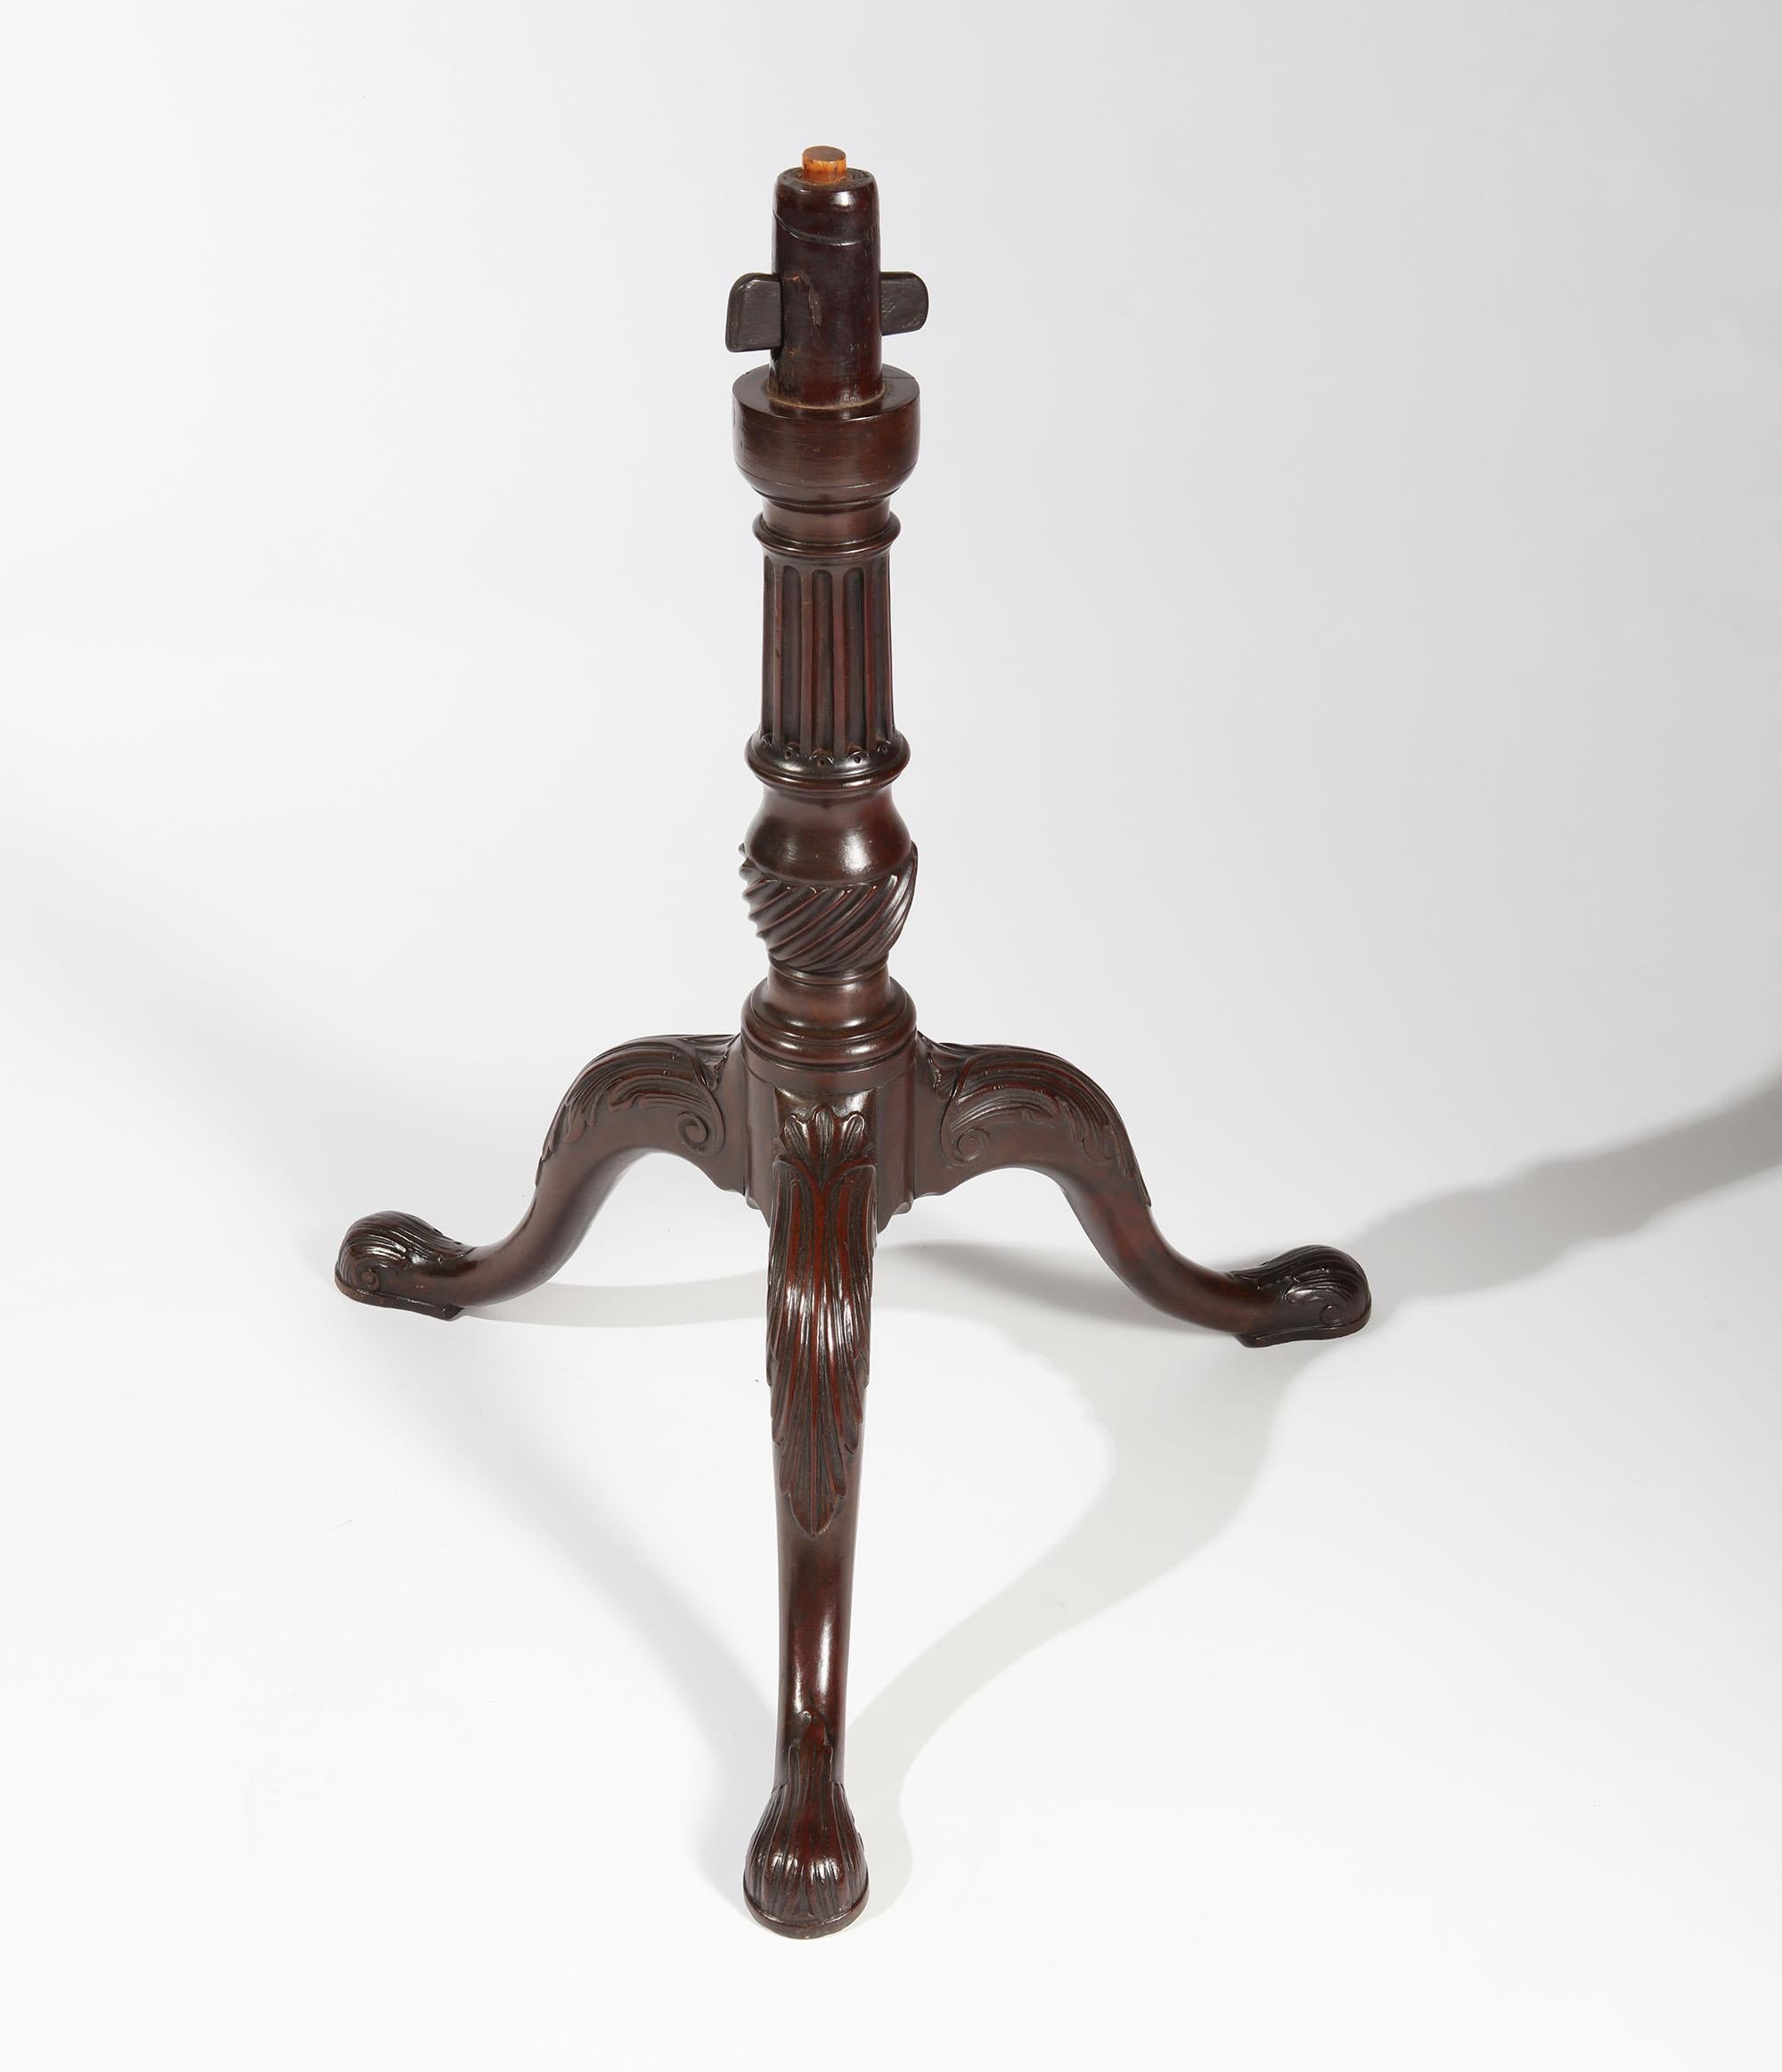 George II Chippendale Mahogany Tripod Table In Good Condition For Sale In London, by appointment only